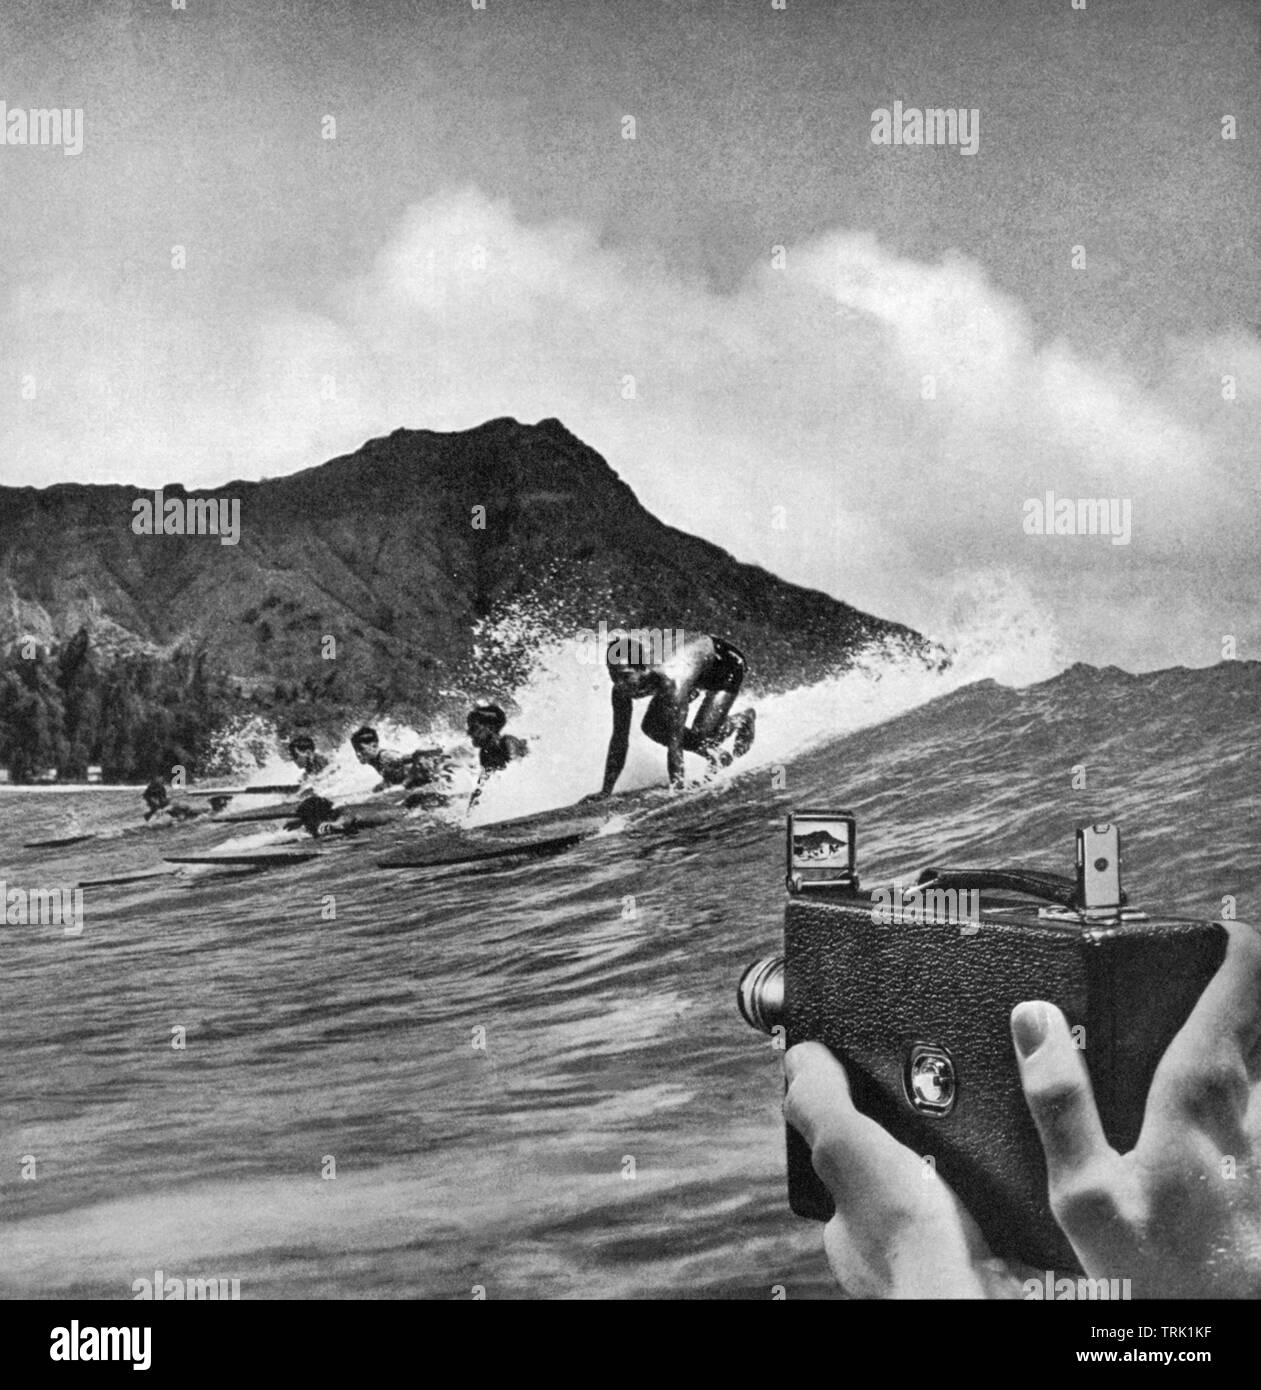 View of surfers catching a wave in Waikiki in a 1934 magazine ad for Kodak movie cameras. Stock Photo